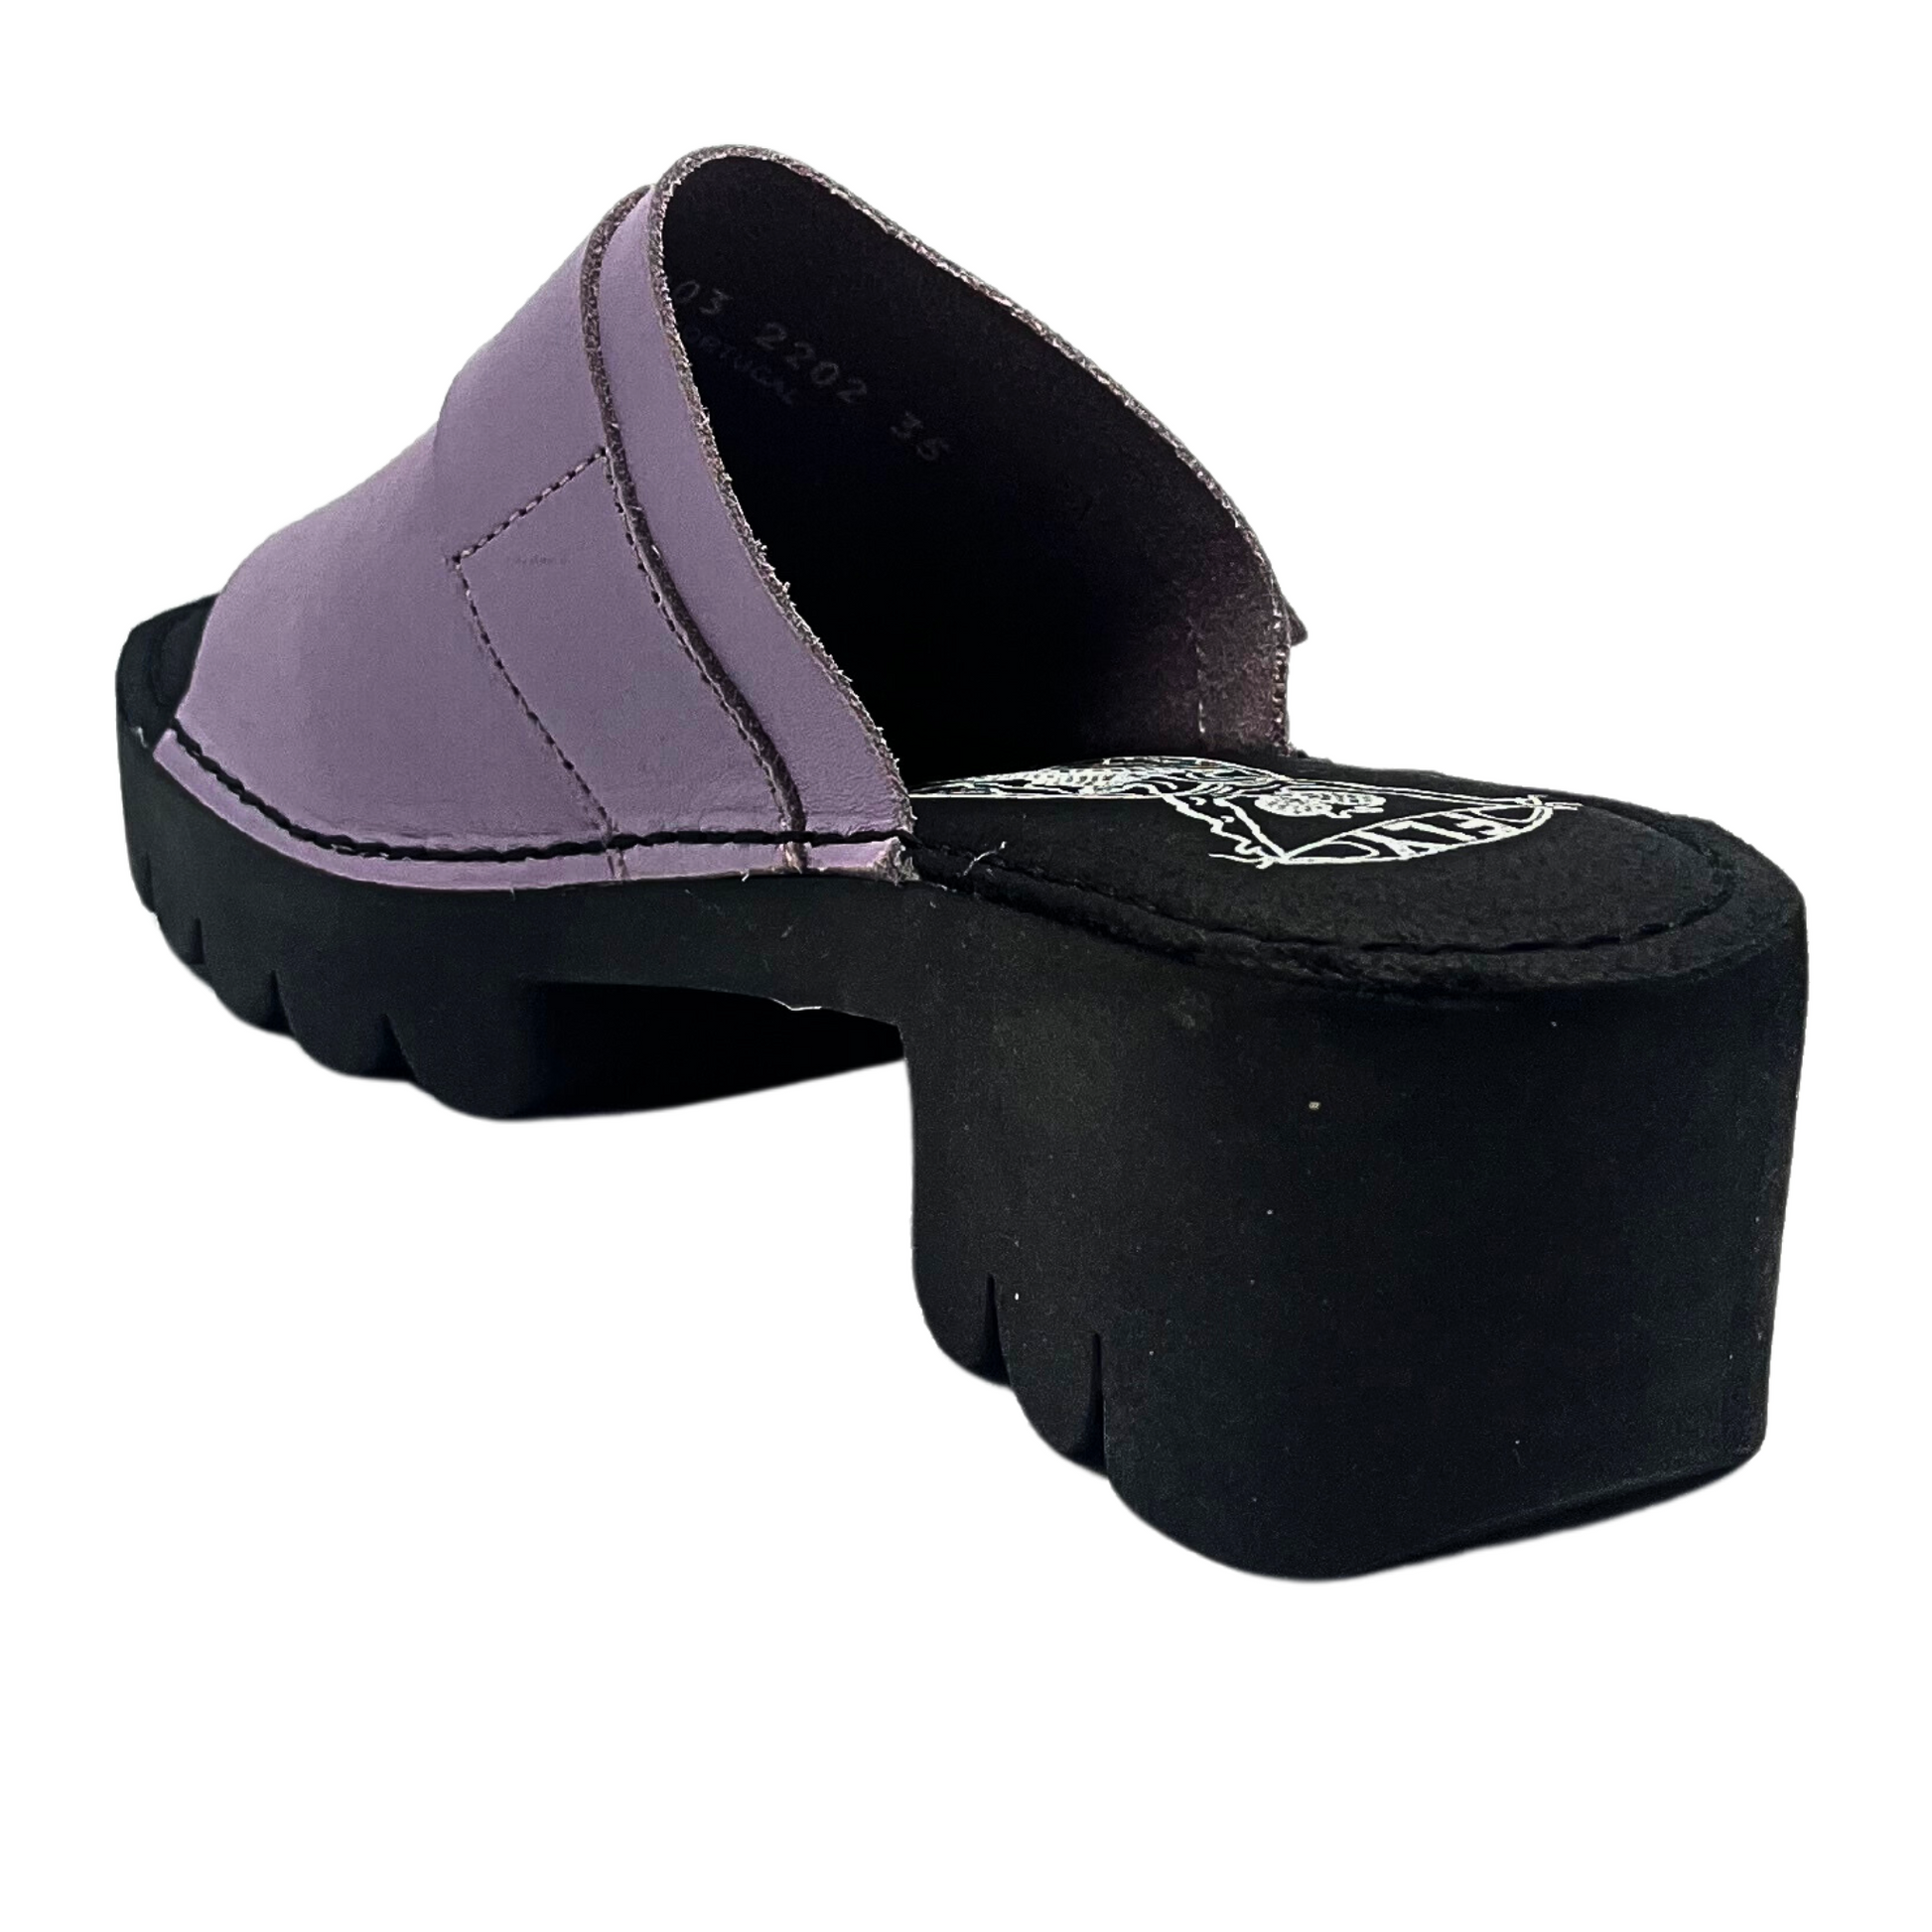 Rear view of mule sandal.  Chunky black sole with lilac leather upper